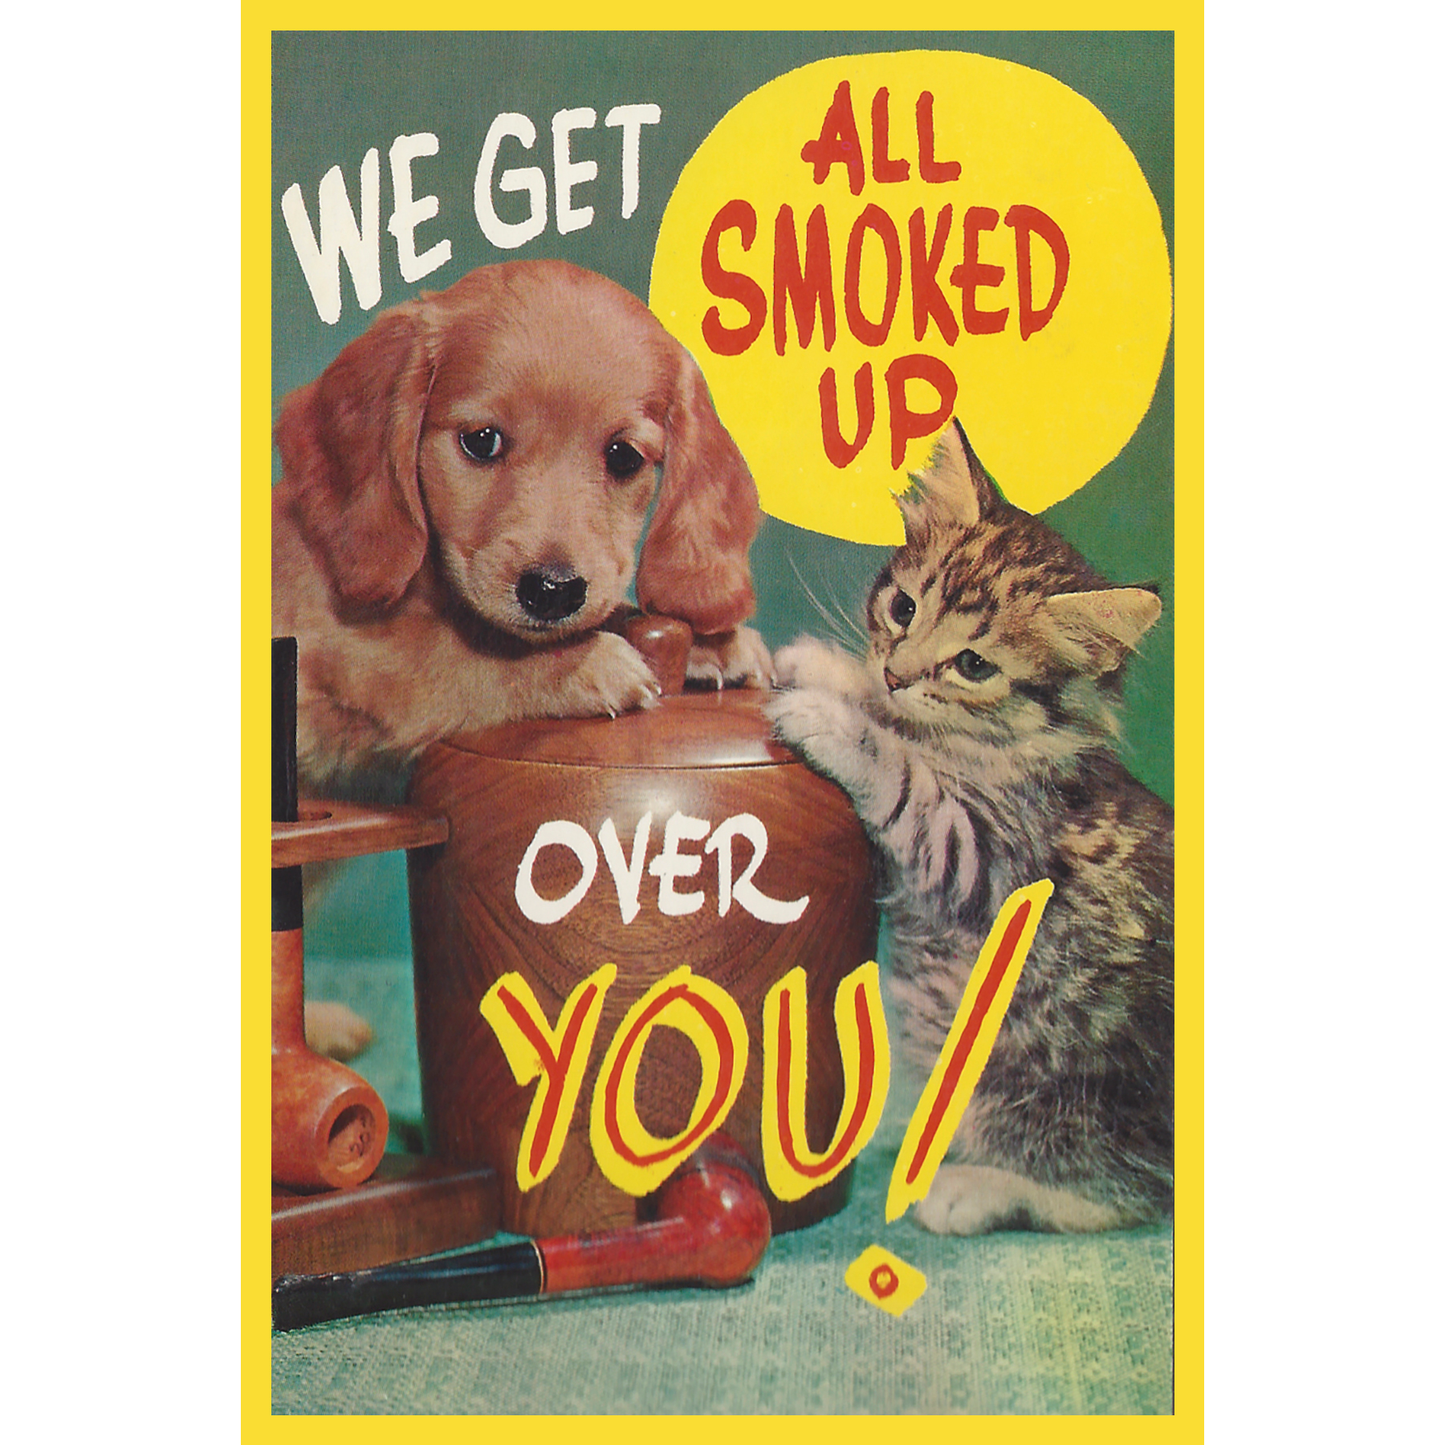 PC0015 We Get All Smoked Up Over You! Postcard